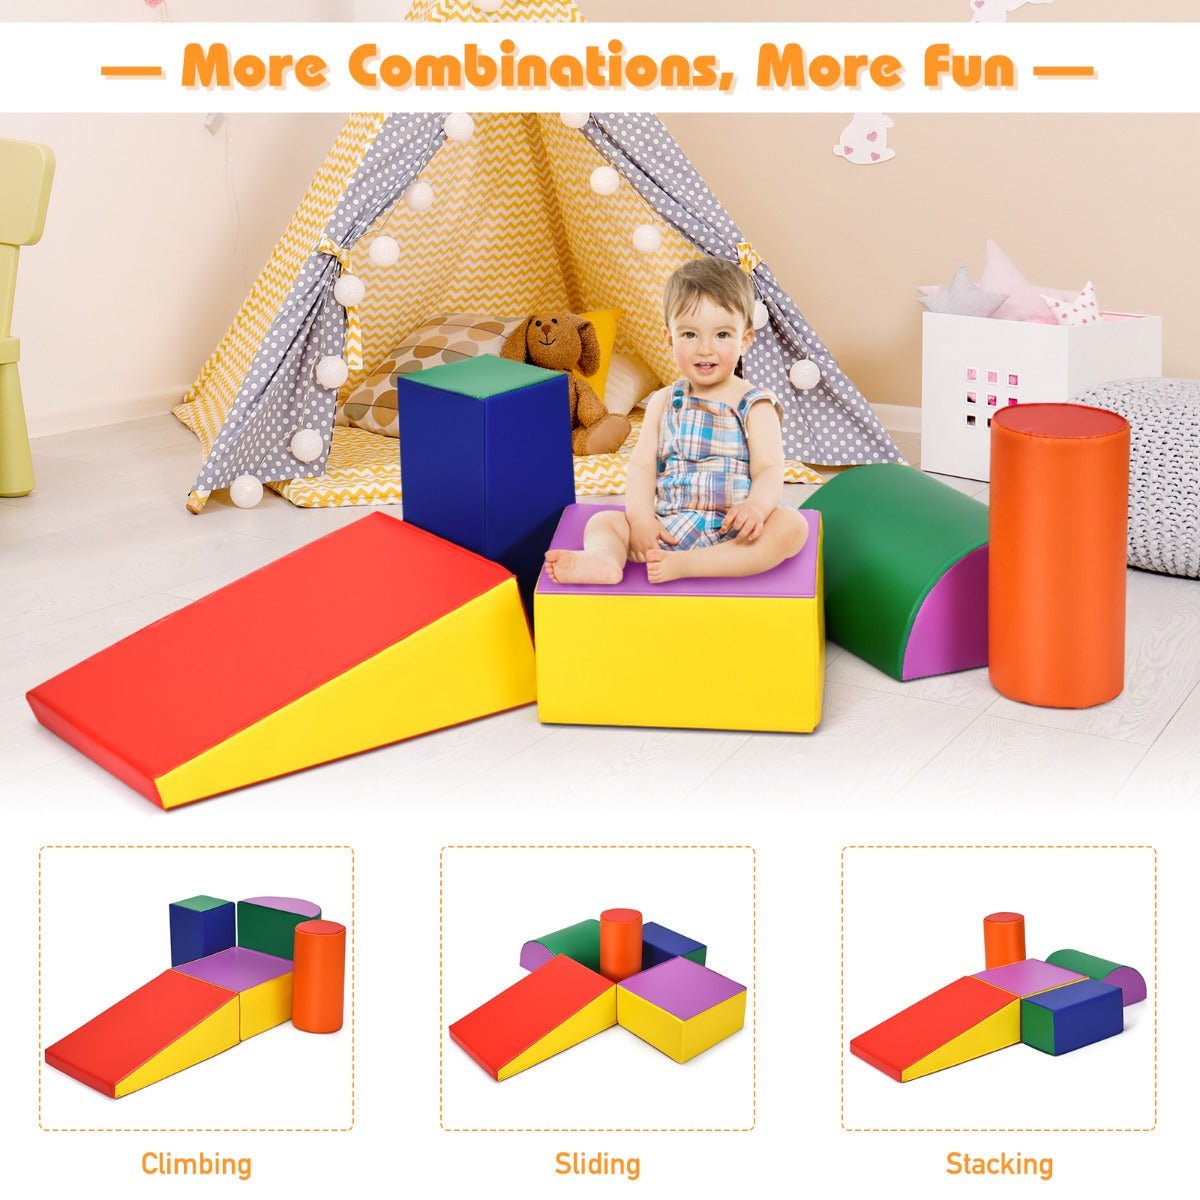 Let the Adventure Begin with Our Multicolour Playset!